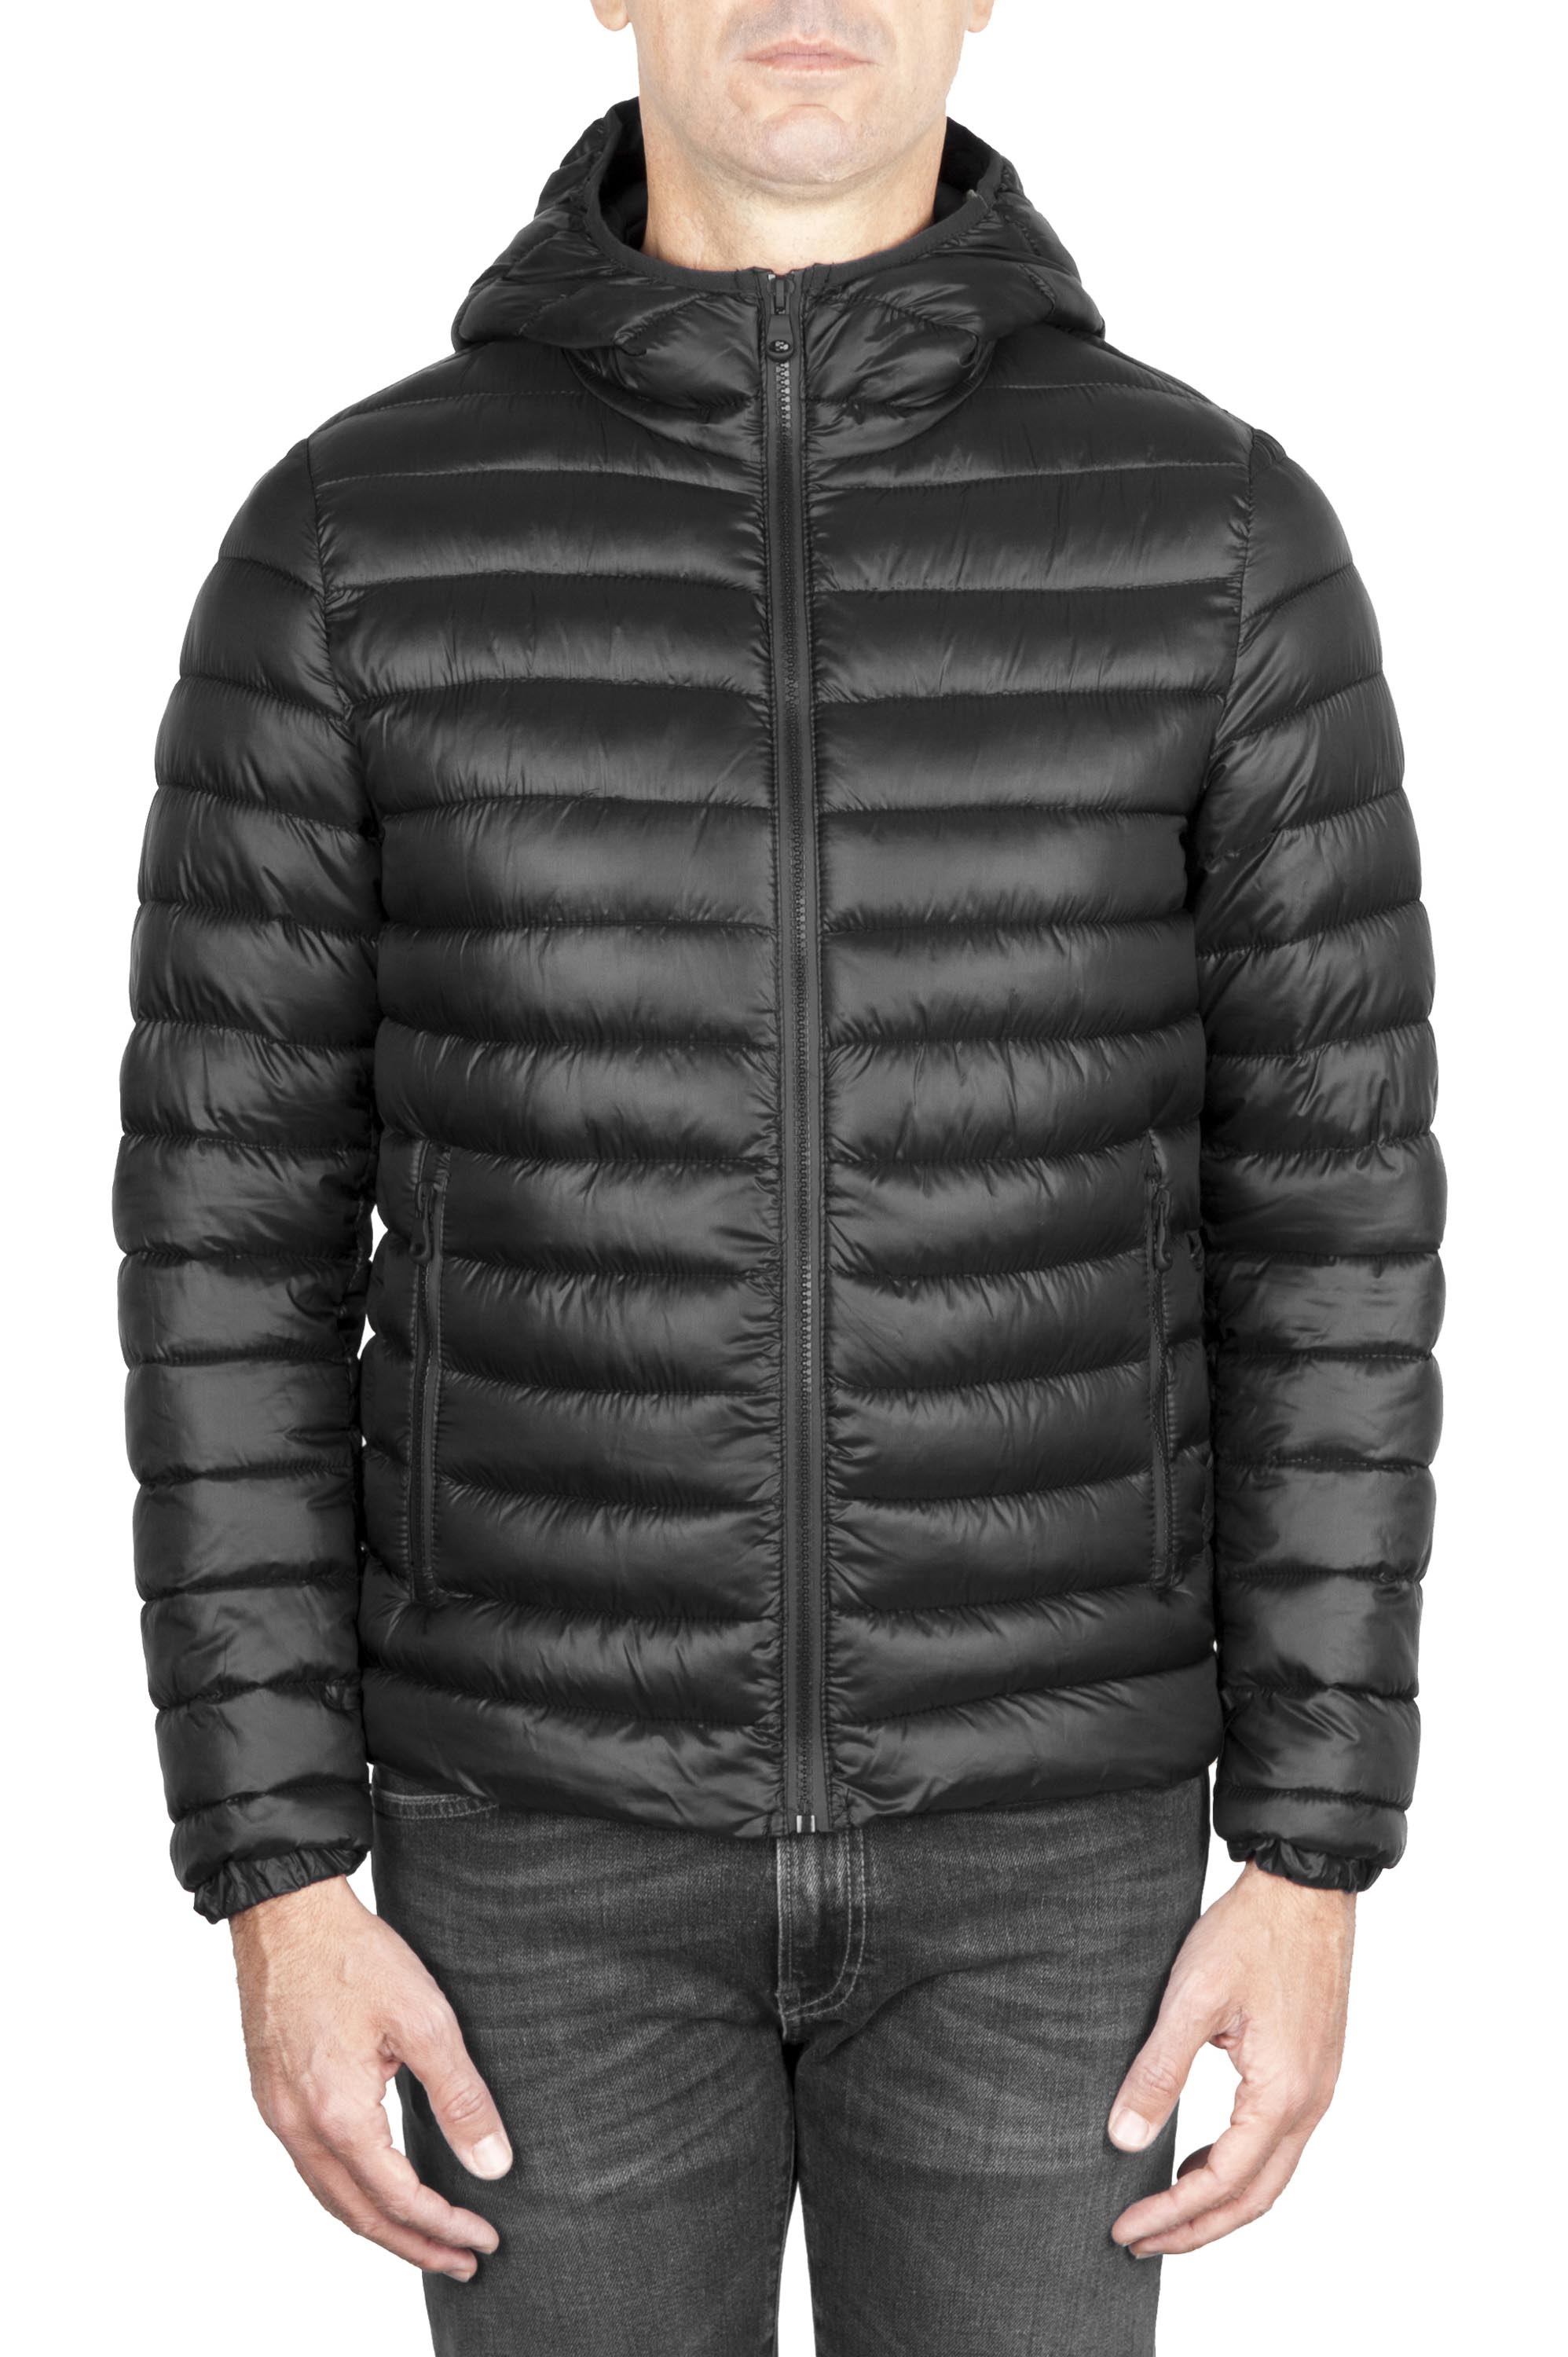 SBU 01586 Thermic insulated hooded down jacket black 01